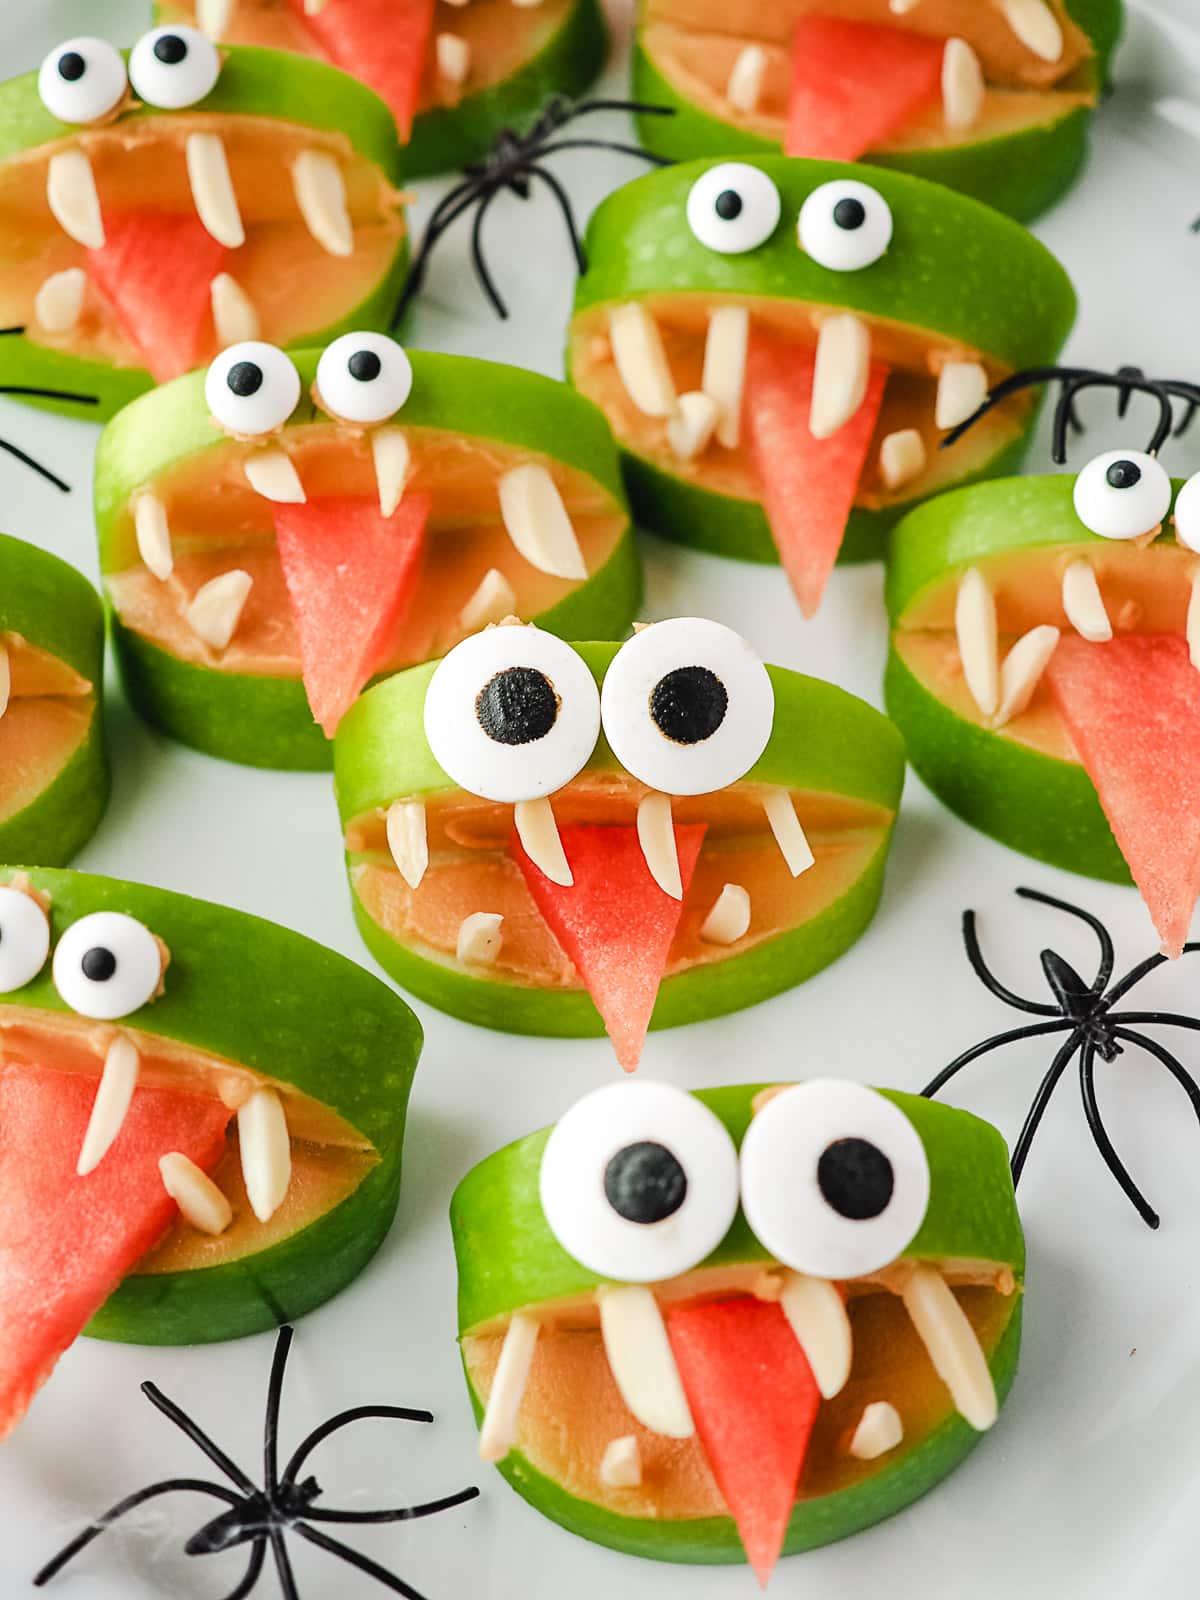 Apple monsters on a plate with toy spiders.